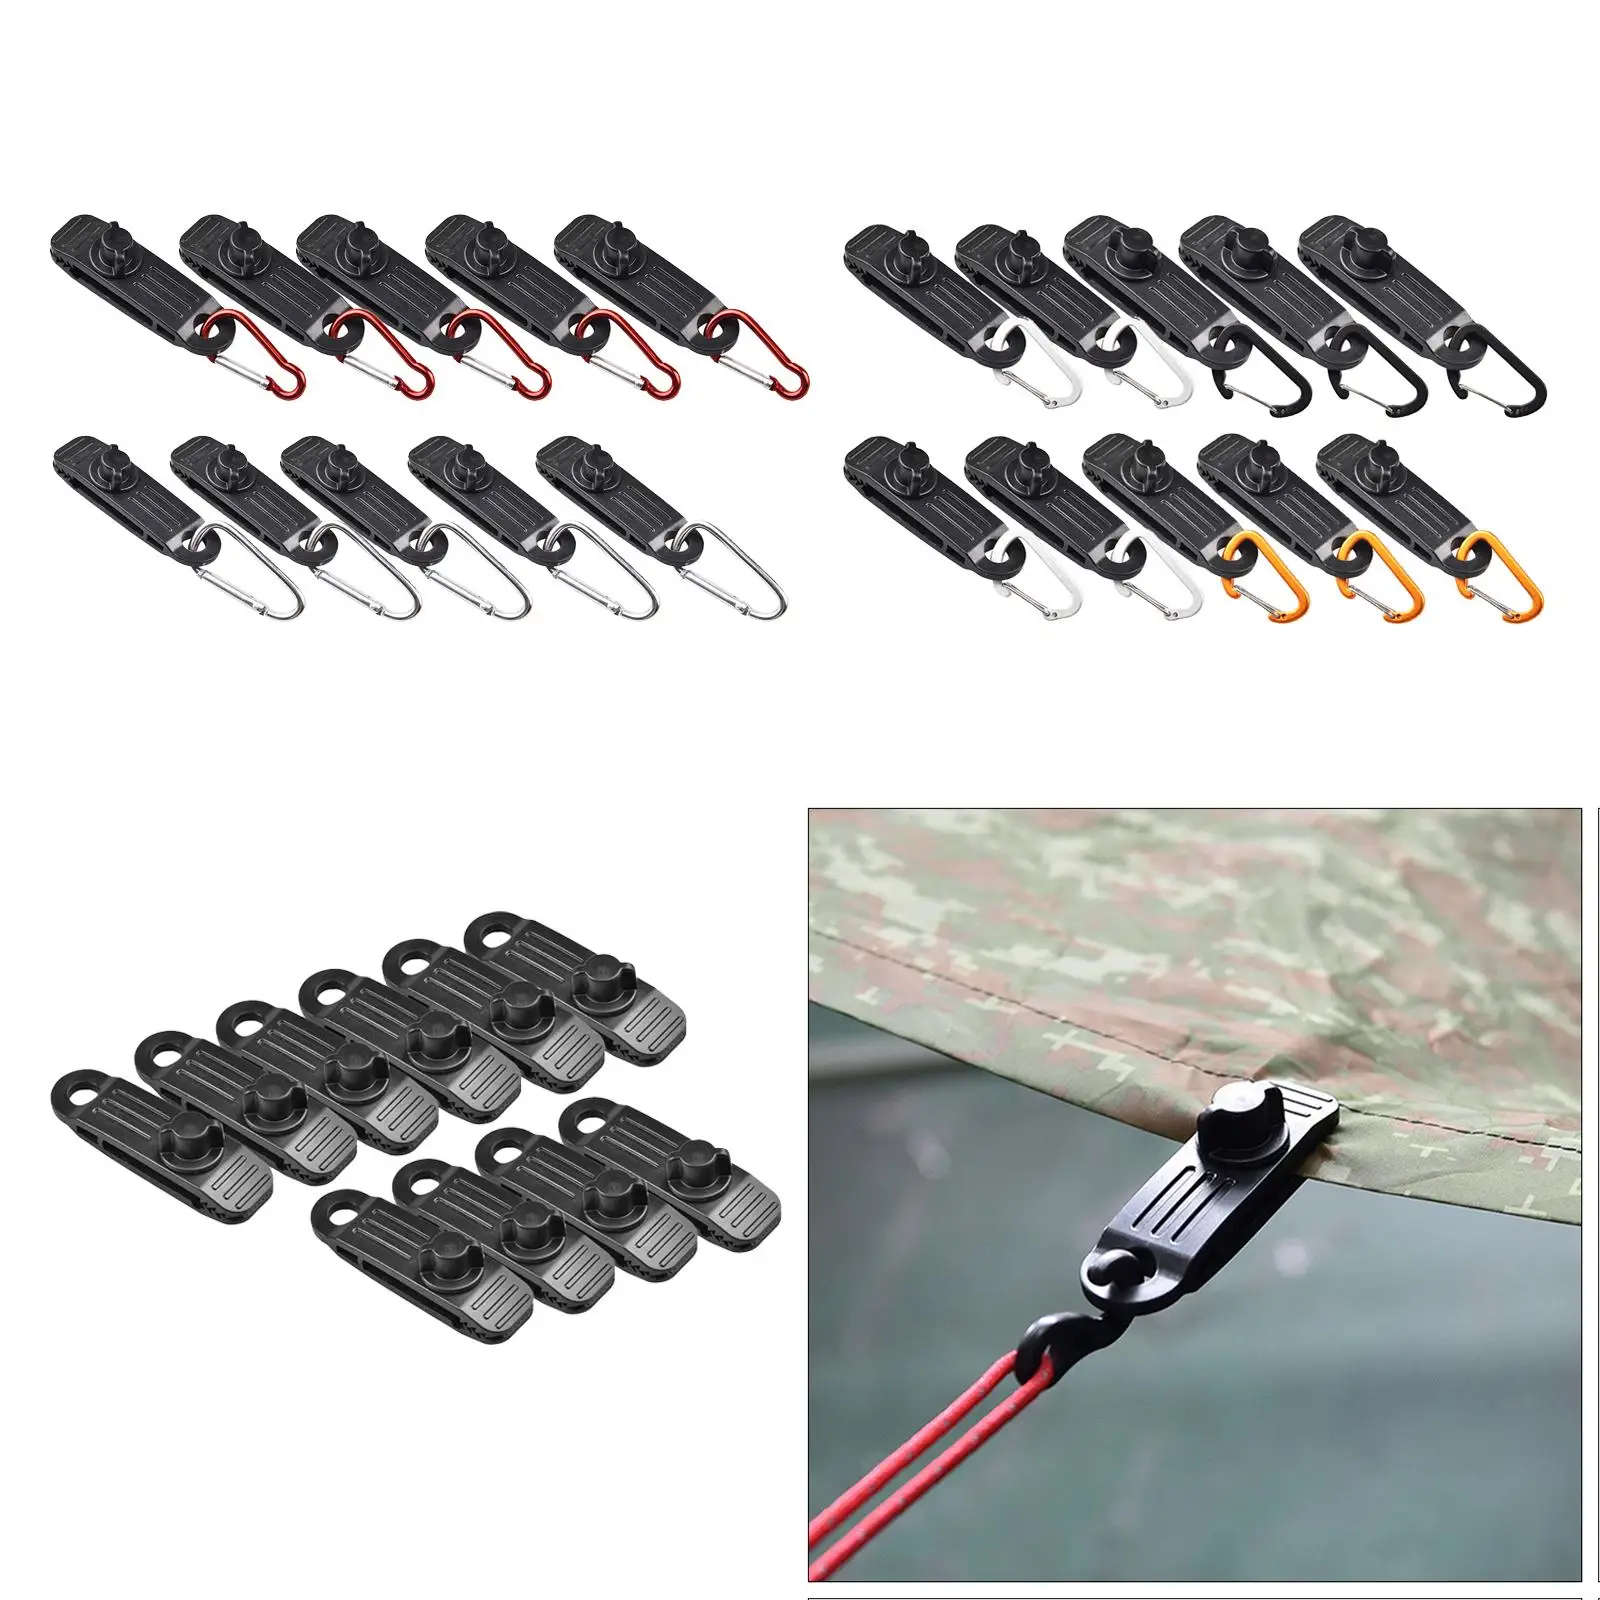 10Pcs Durable Tent Snaps Clamp Awning Fasteners Car Cover Tighten Tarp Clips